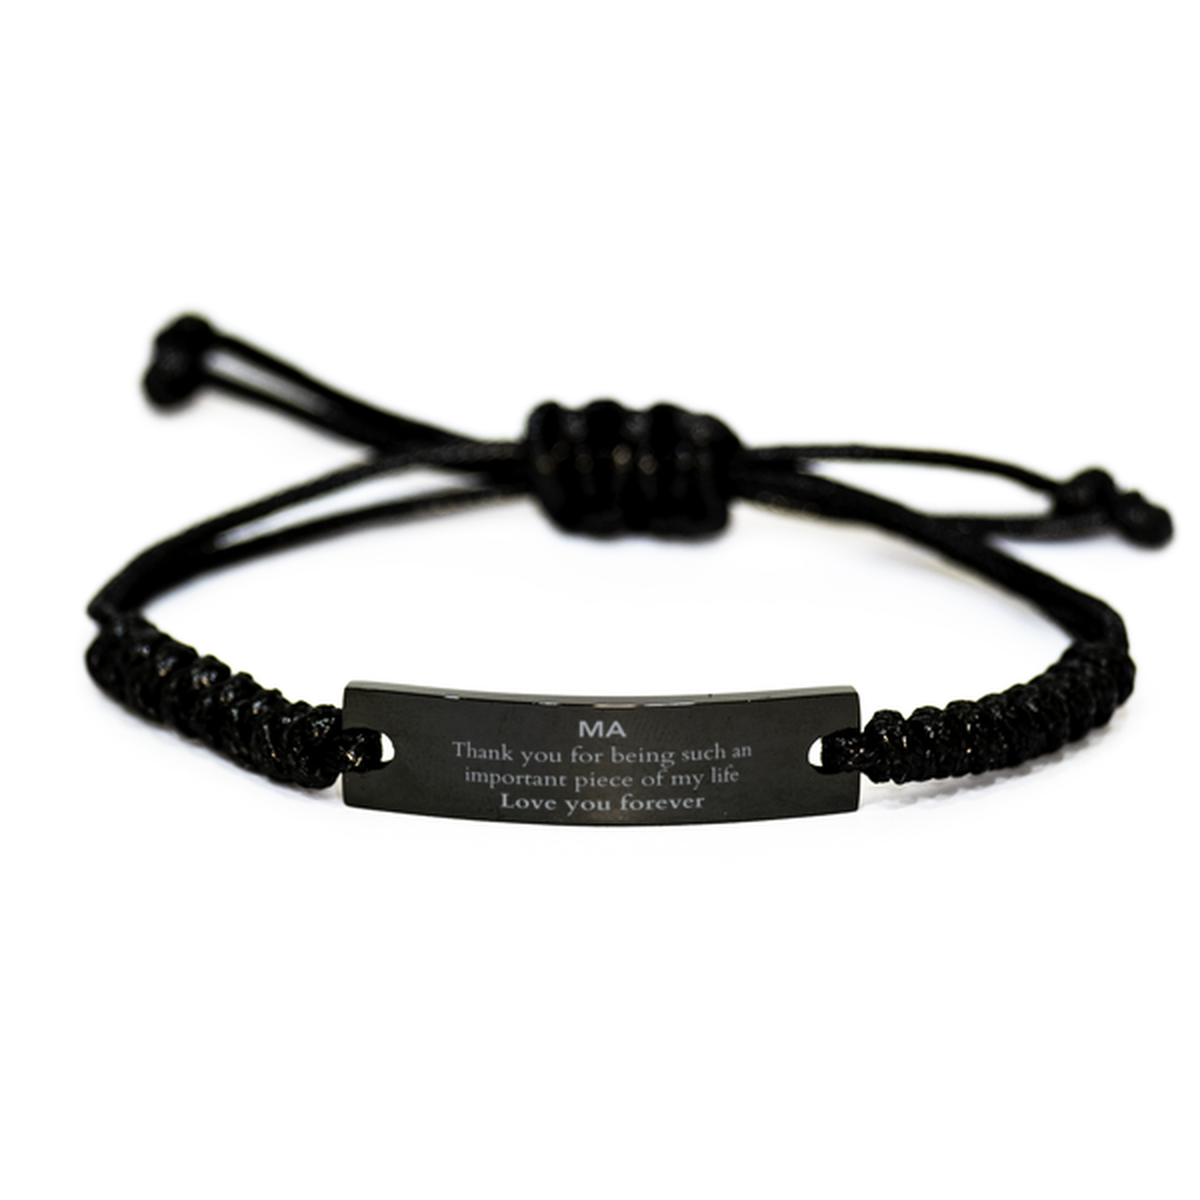 Appropriate Ma Black Rope Bracelet Epic Birthday Gifts for Ma Thank you for being such an important piece of my life Ma Christmas Mothers Fathers Day